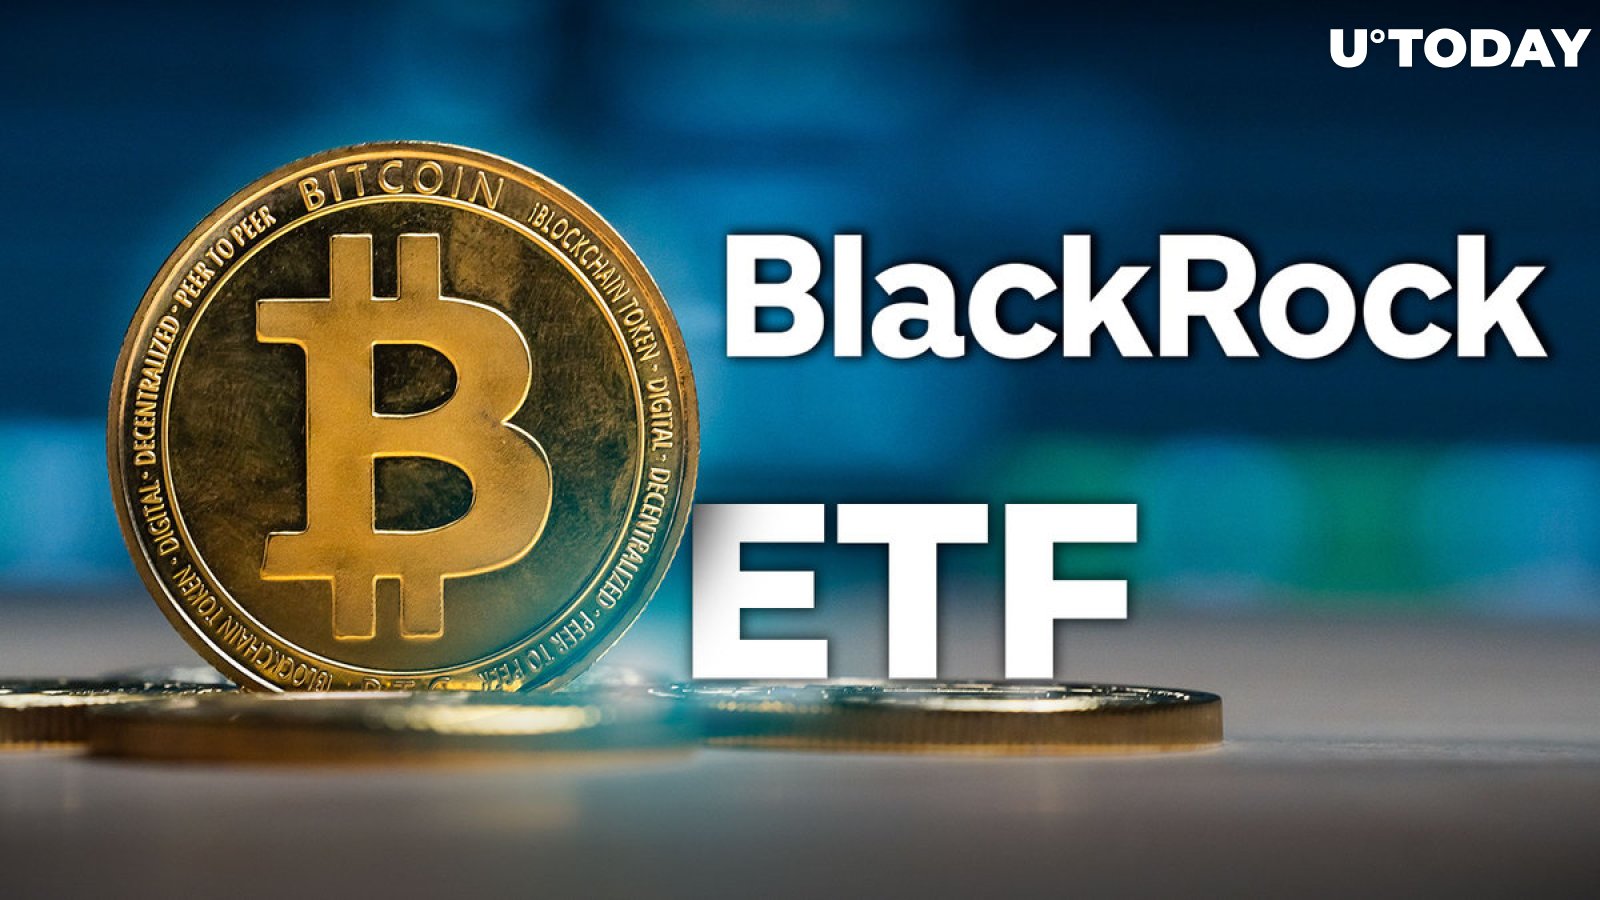 BlackRock Bitcoin ETF Enters Top 5 Ranking of the Year